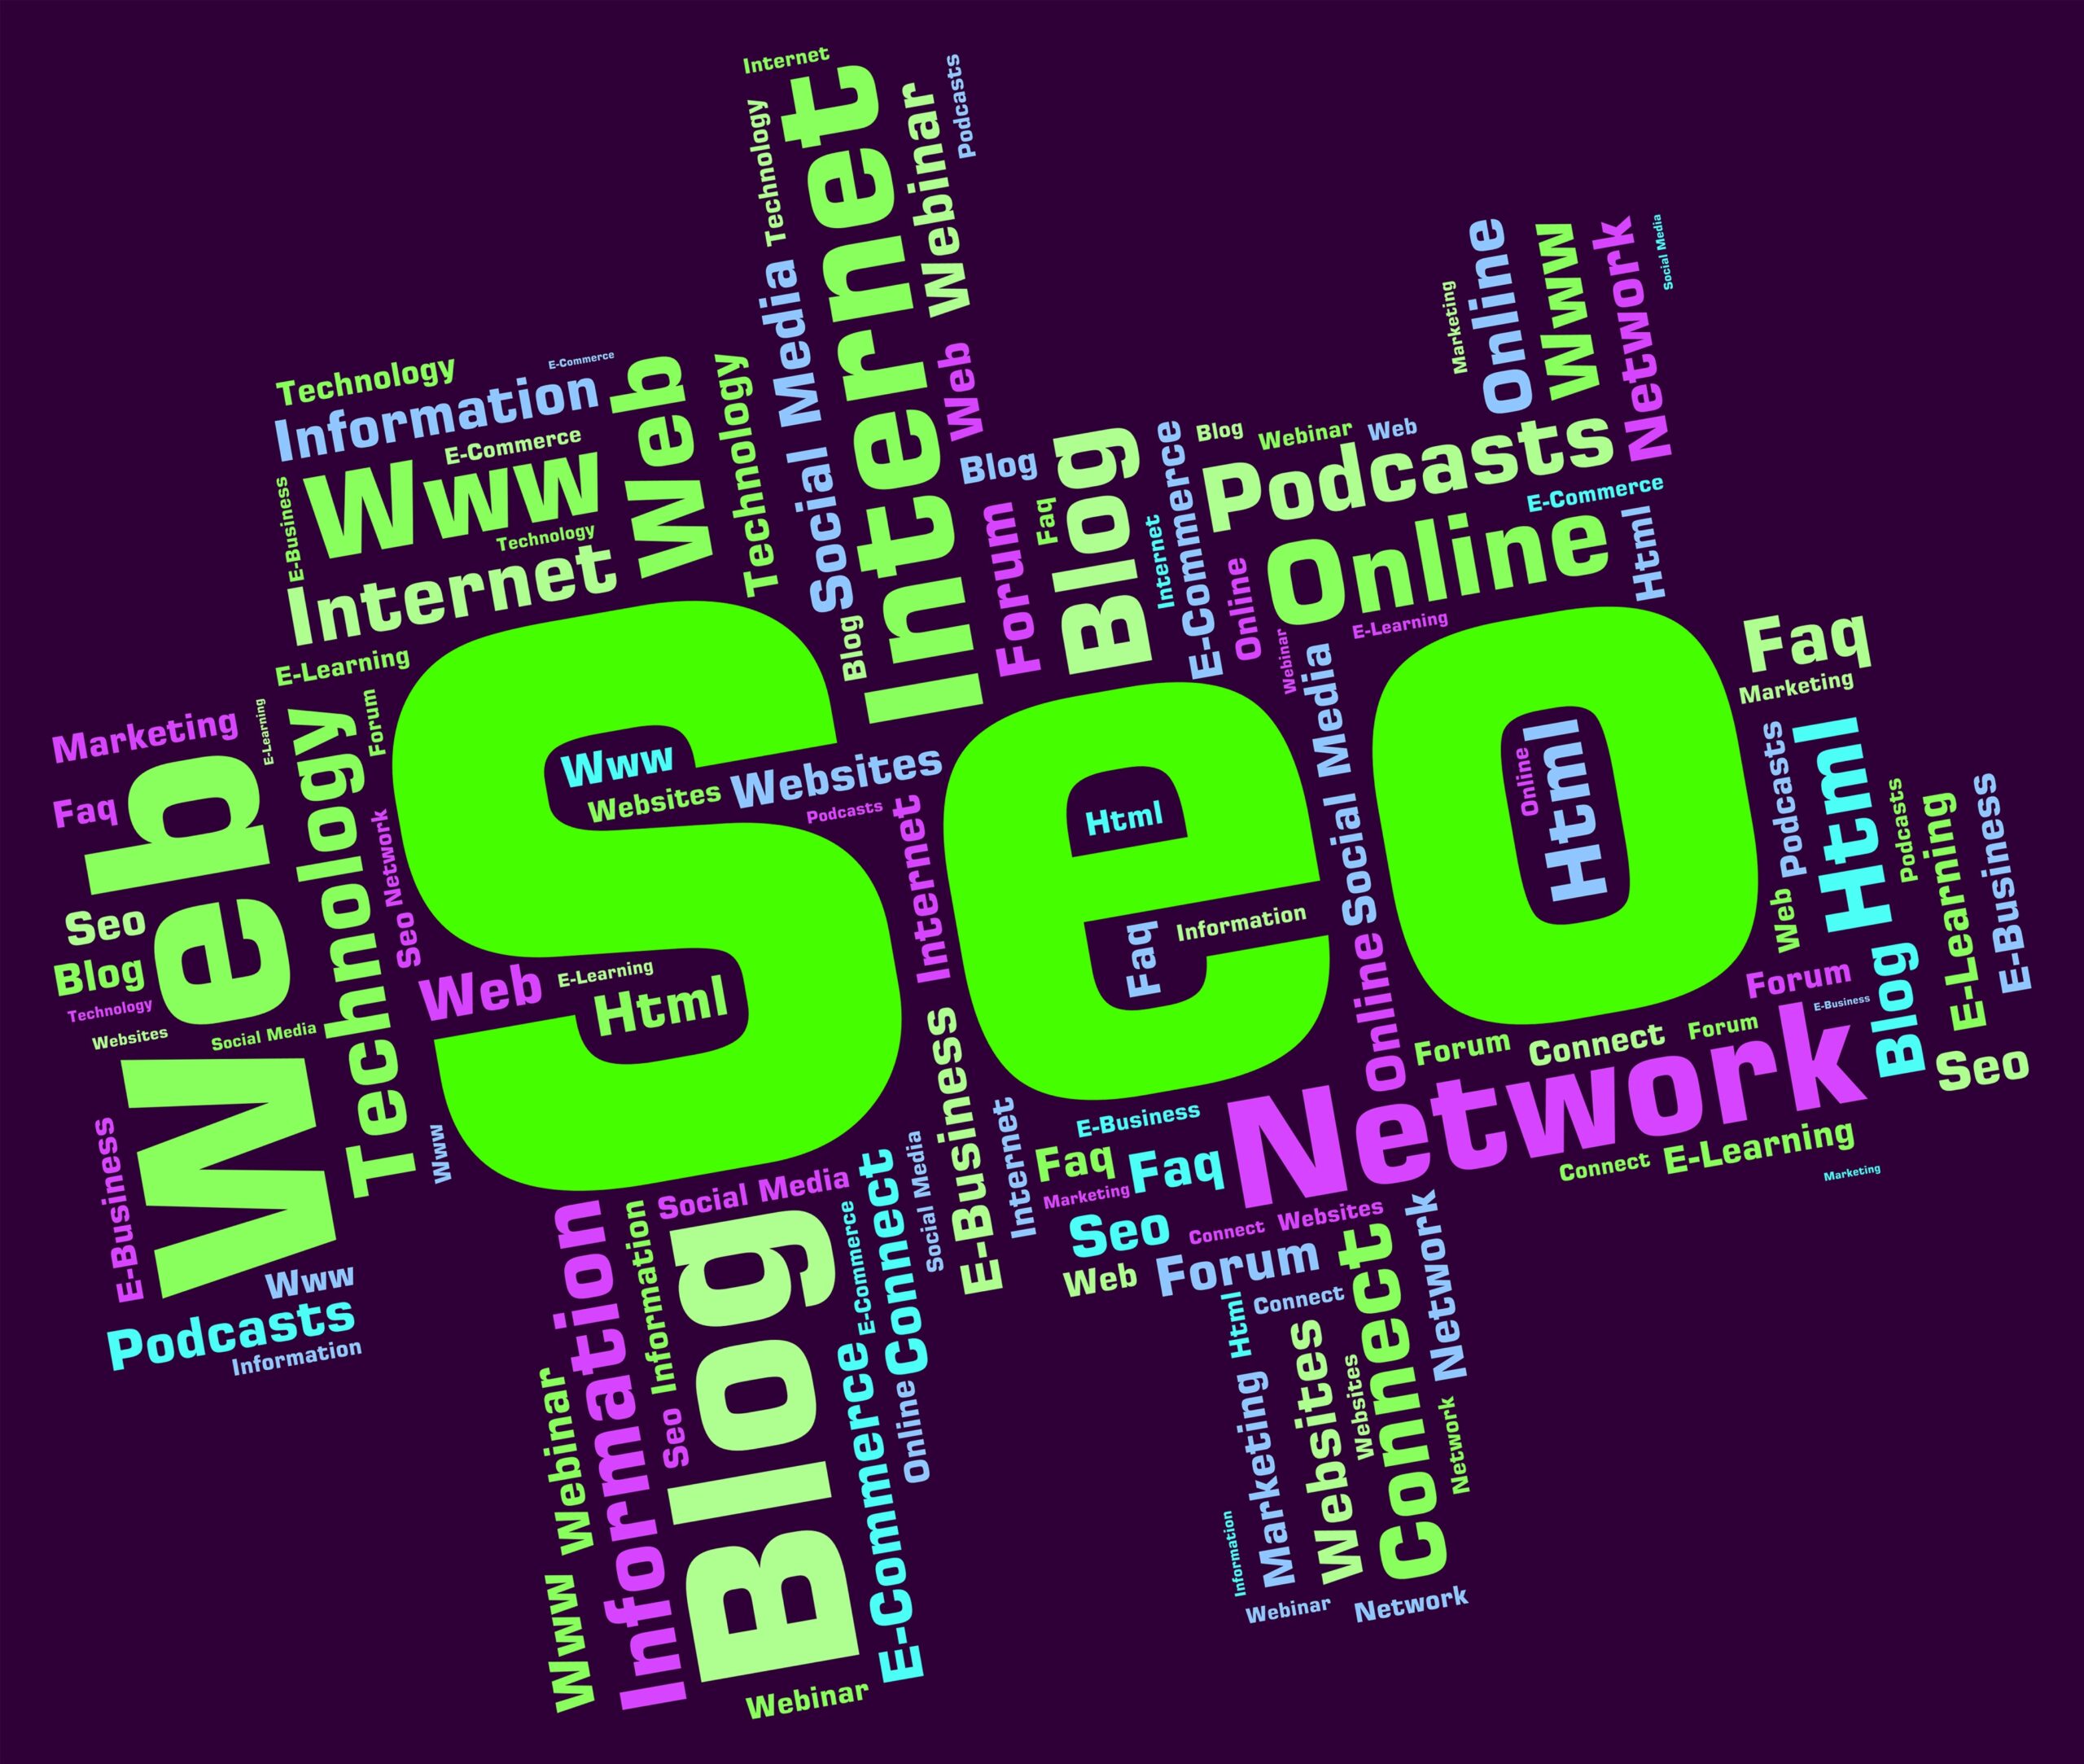 Does SEO Still Work? Web Services, Inc. Website Design Services in